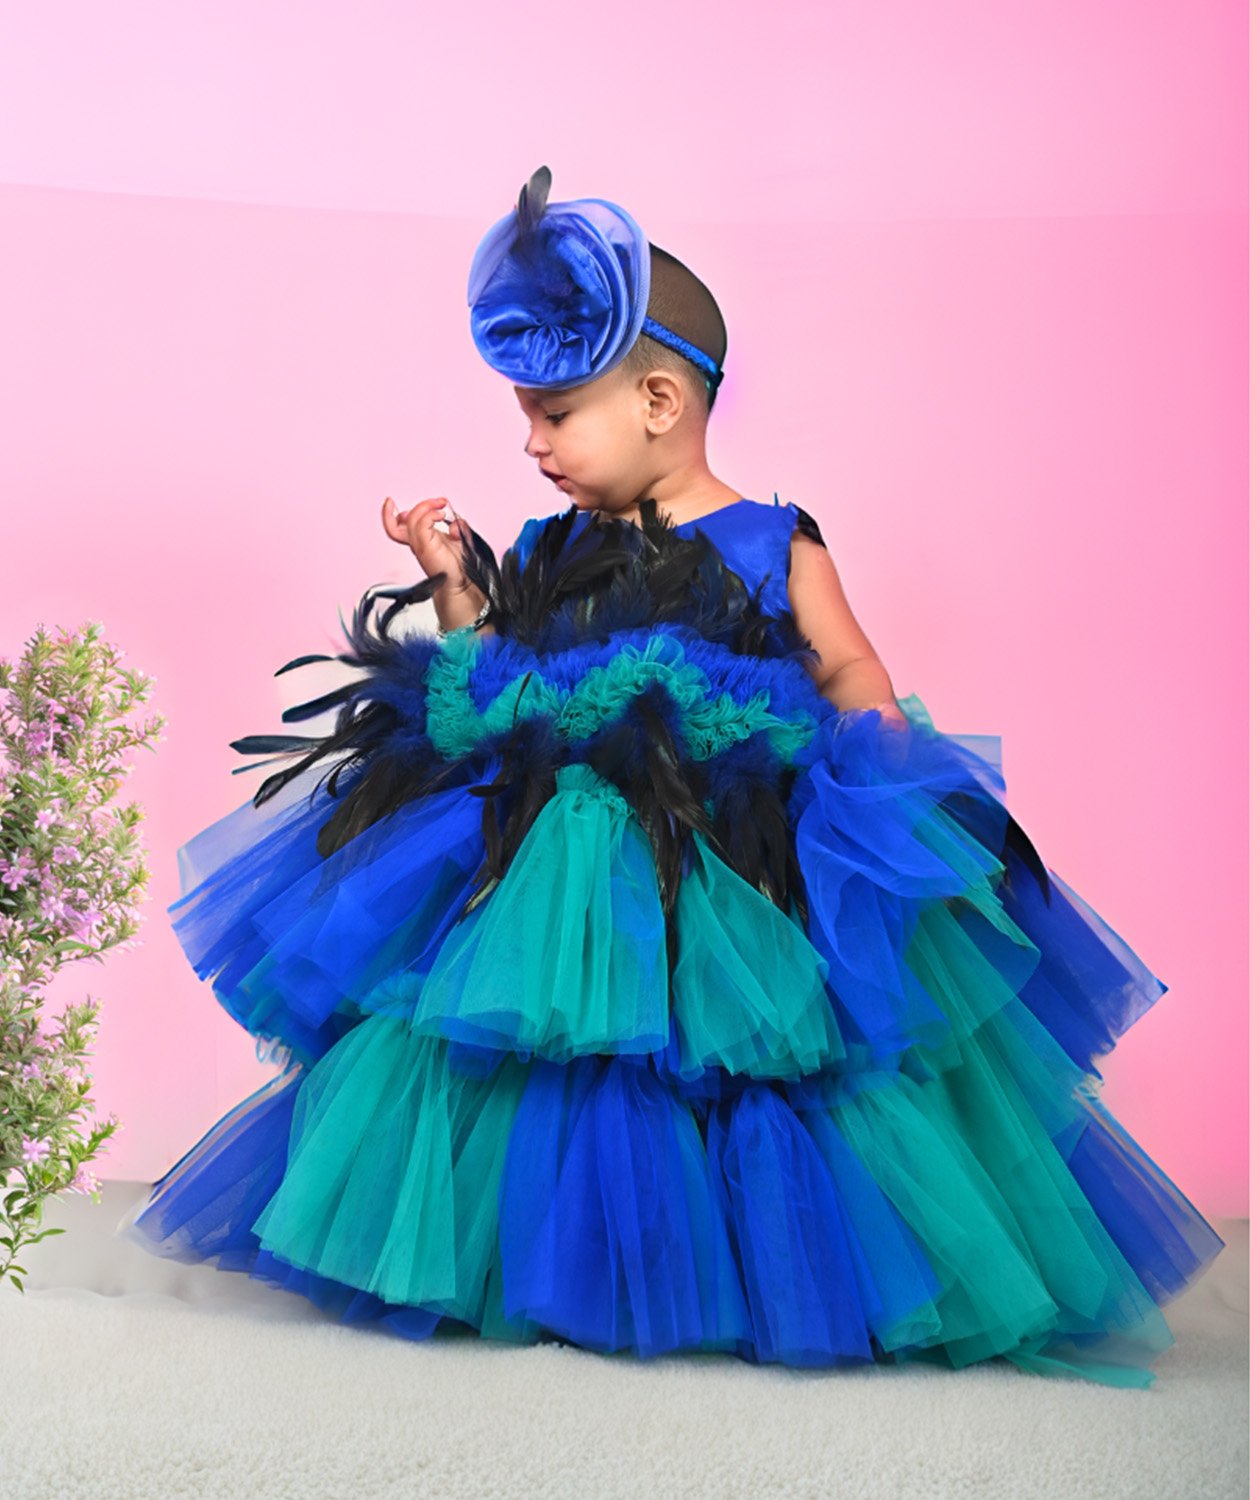 Vibrant Blue And Green Layered Dress With Feather Accents And Matching Headband